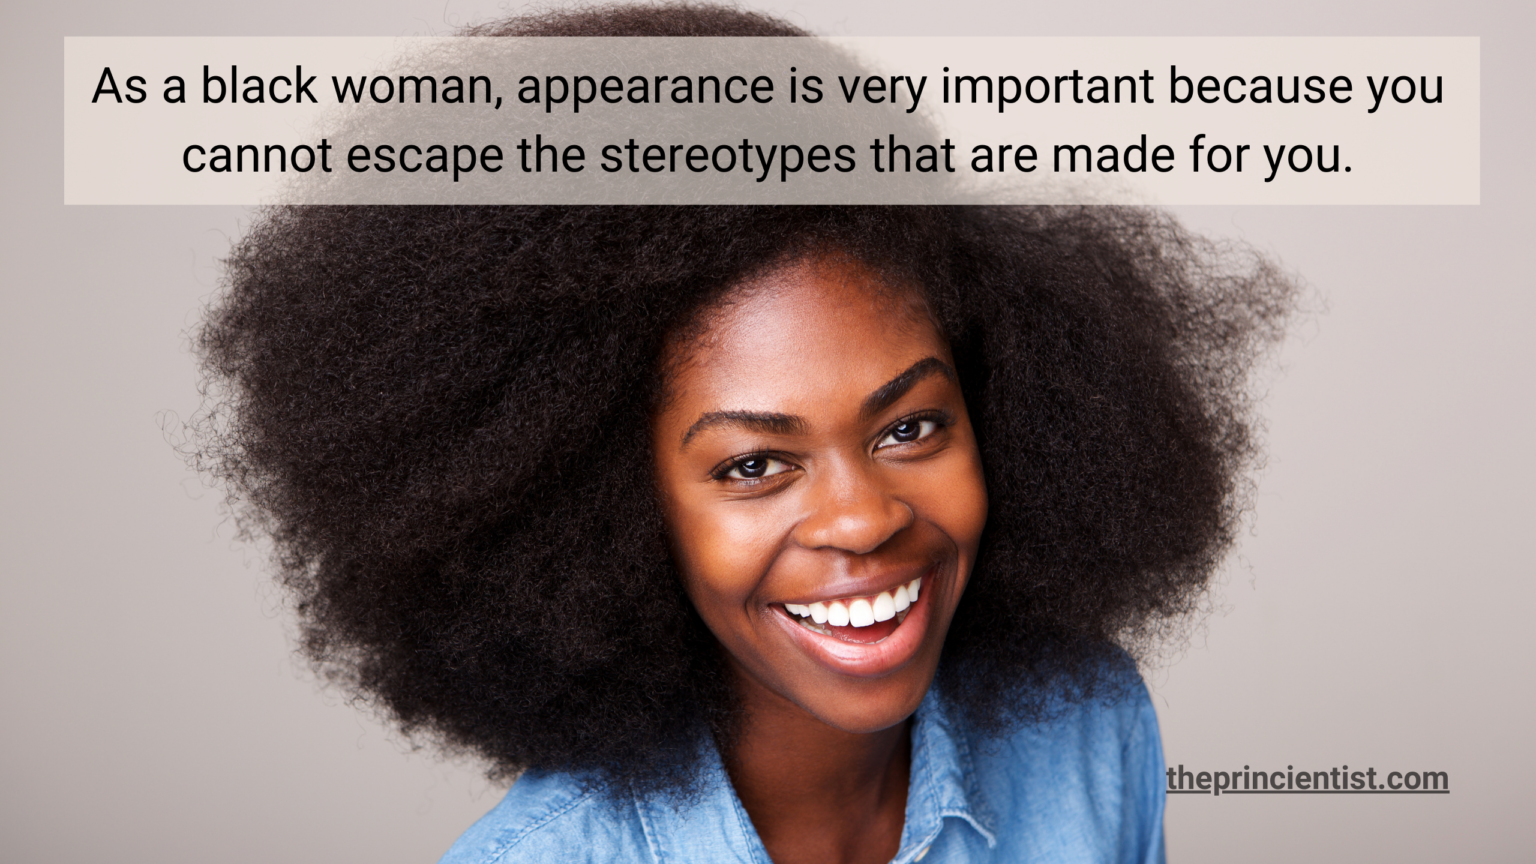 why is apperance important? - breaks stereotypes-photo of a black woman proudly wearing her natural hair